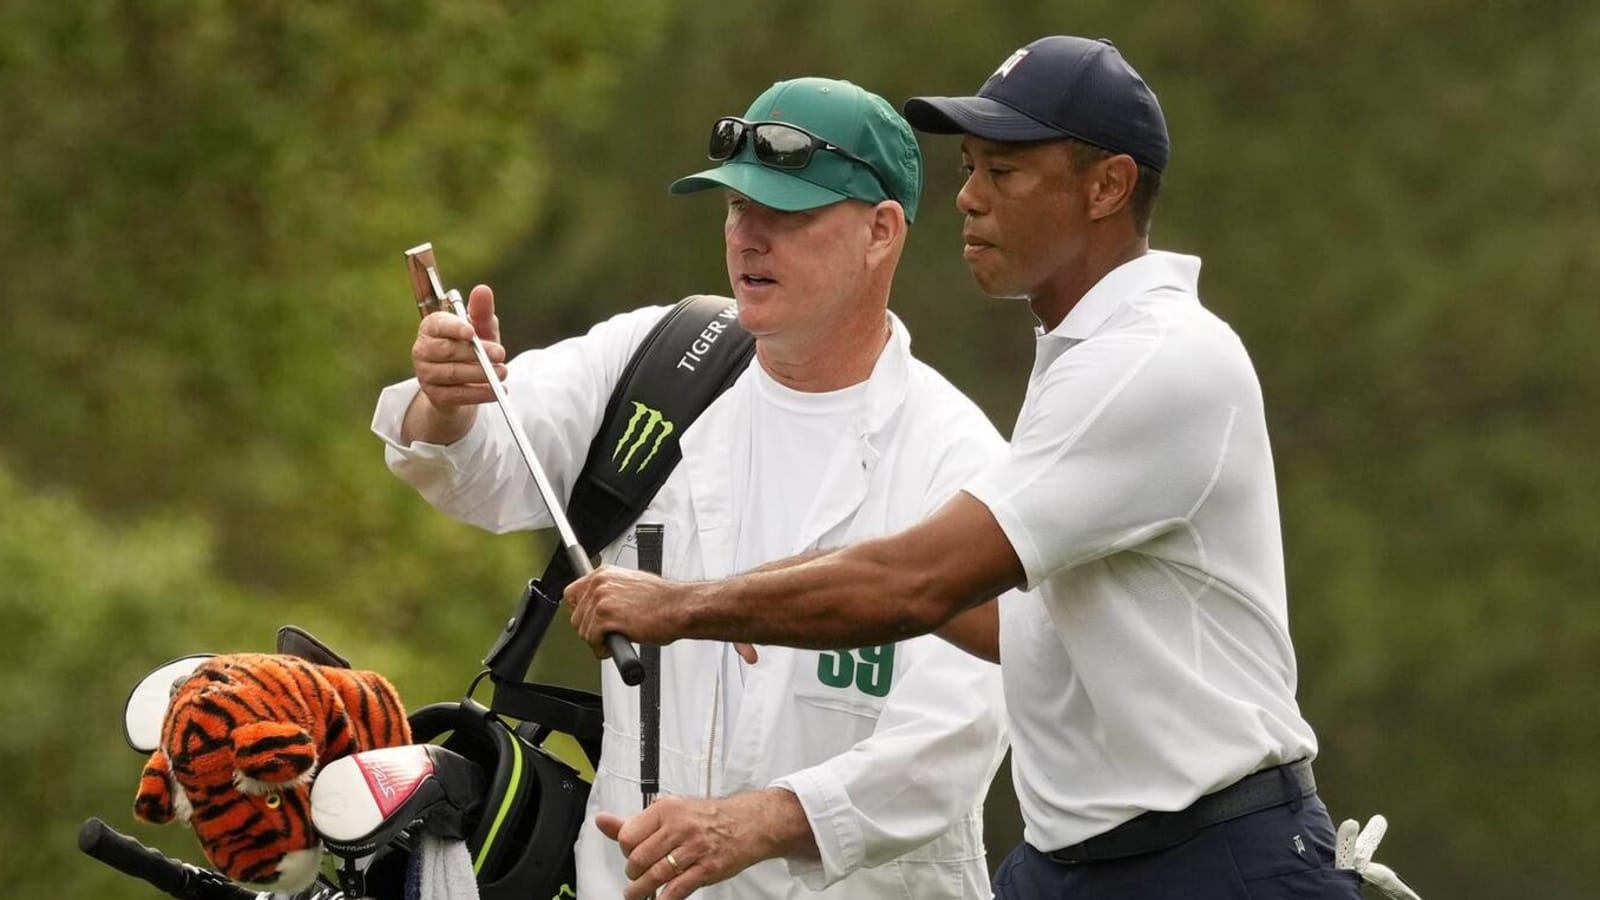 Tiger Woods’ caddie moves on to new golfer